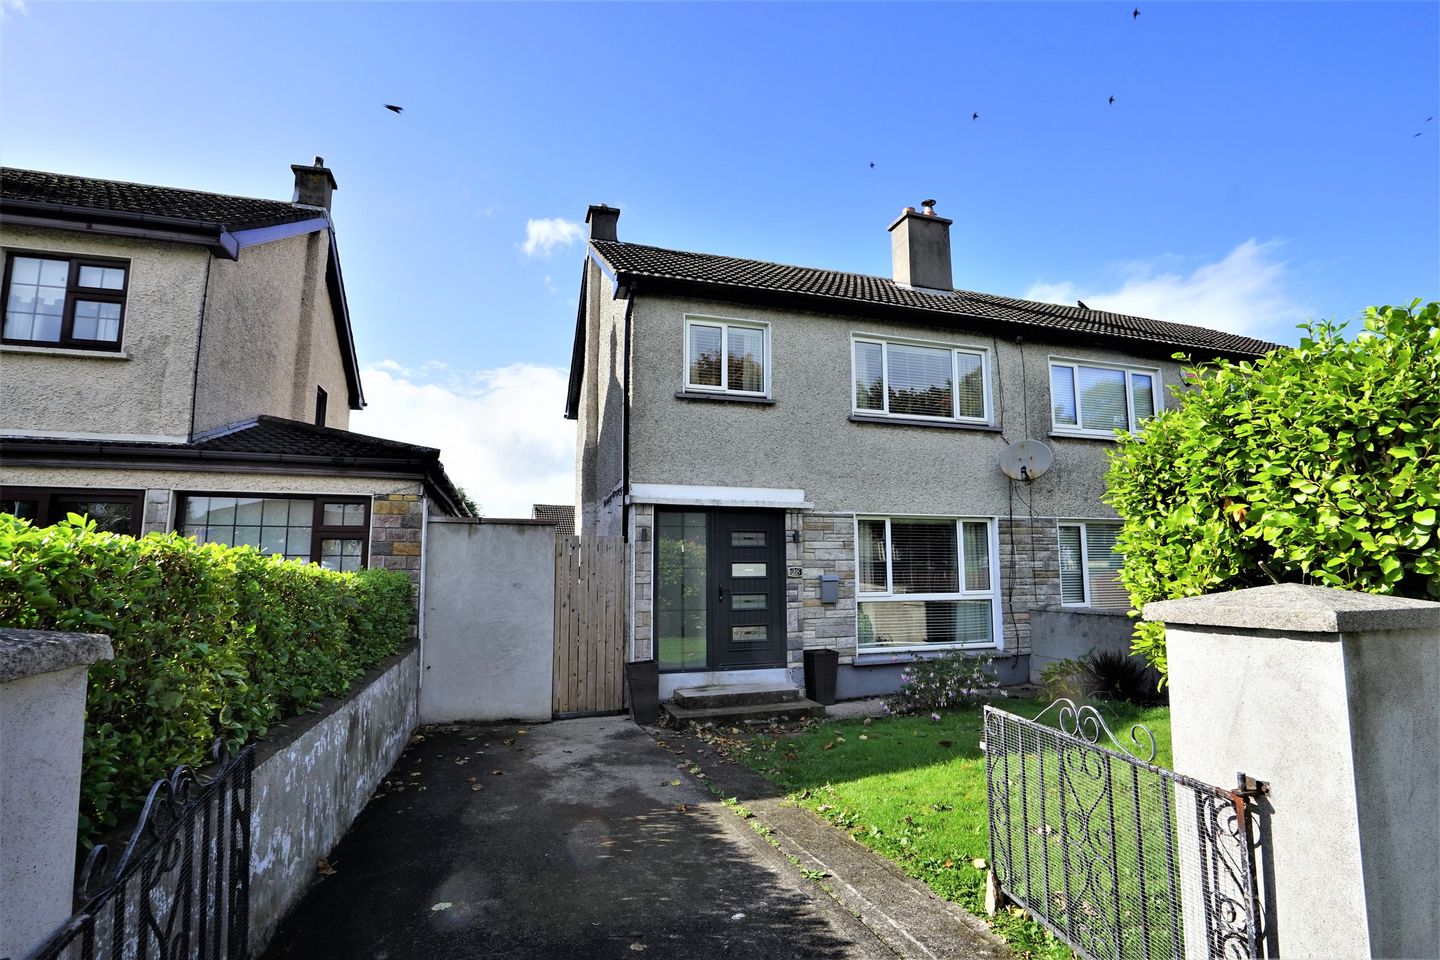 28 Avondale Lawn, Avondale, Waterford City, Co. Waterford